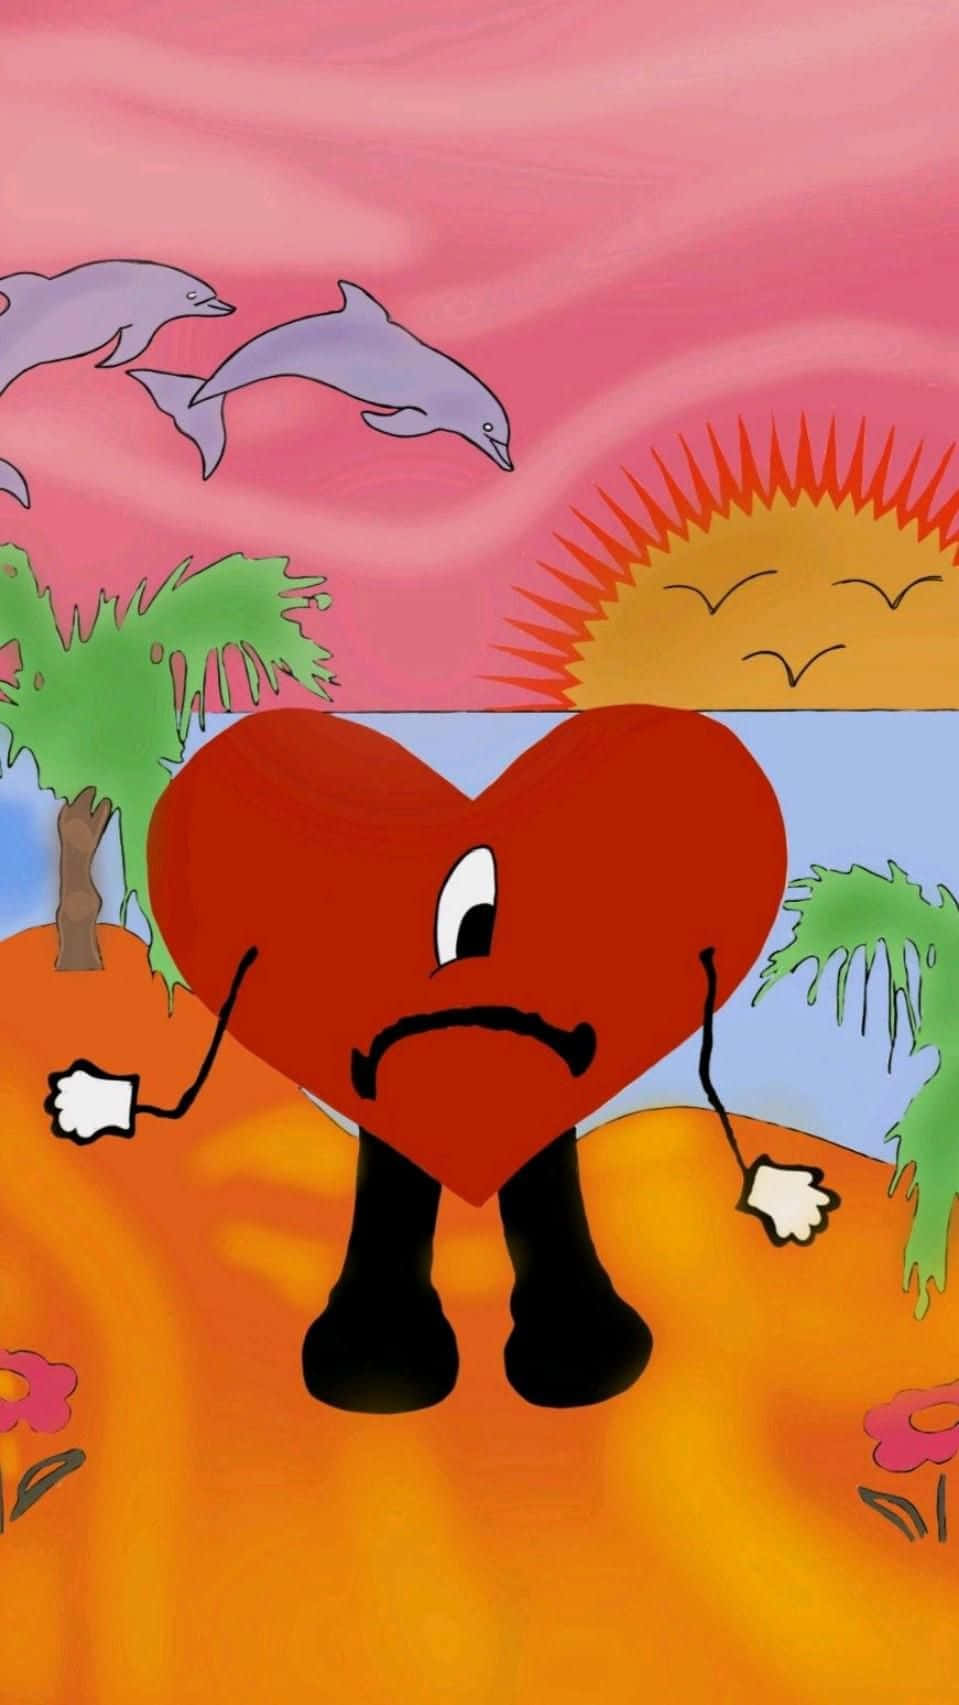 Animated Heart Characteron Tropical Background Wallpaper